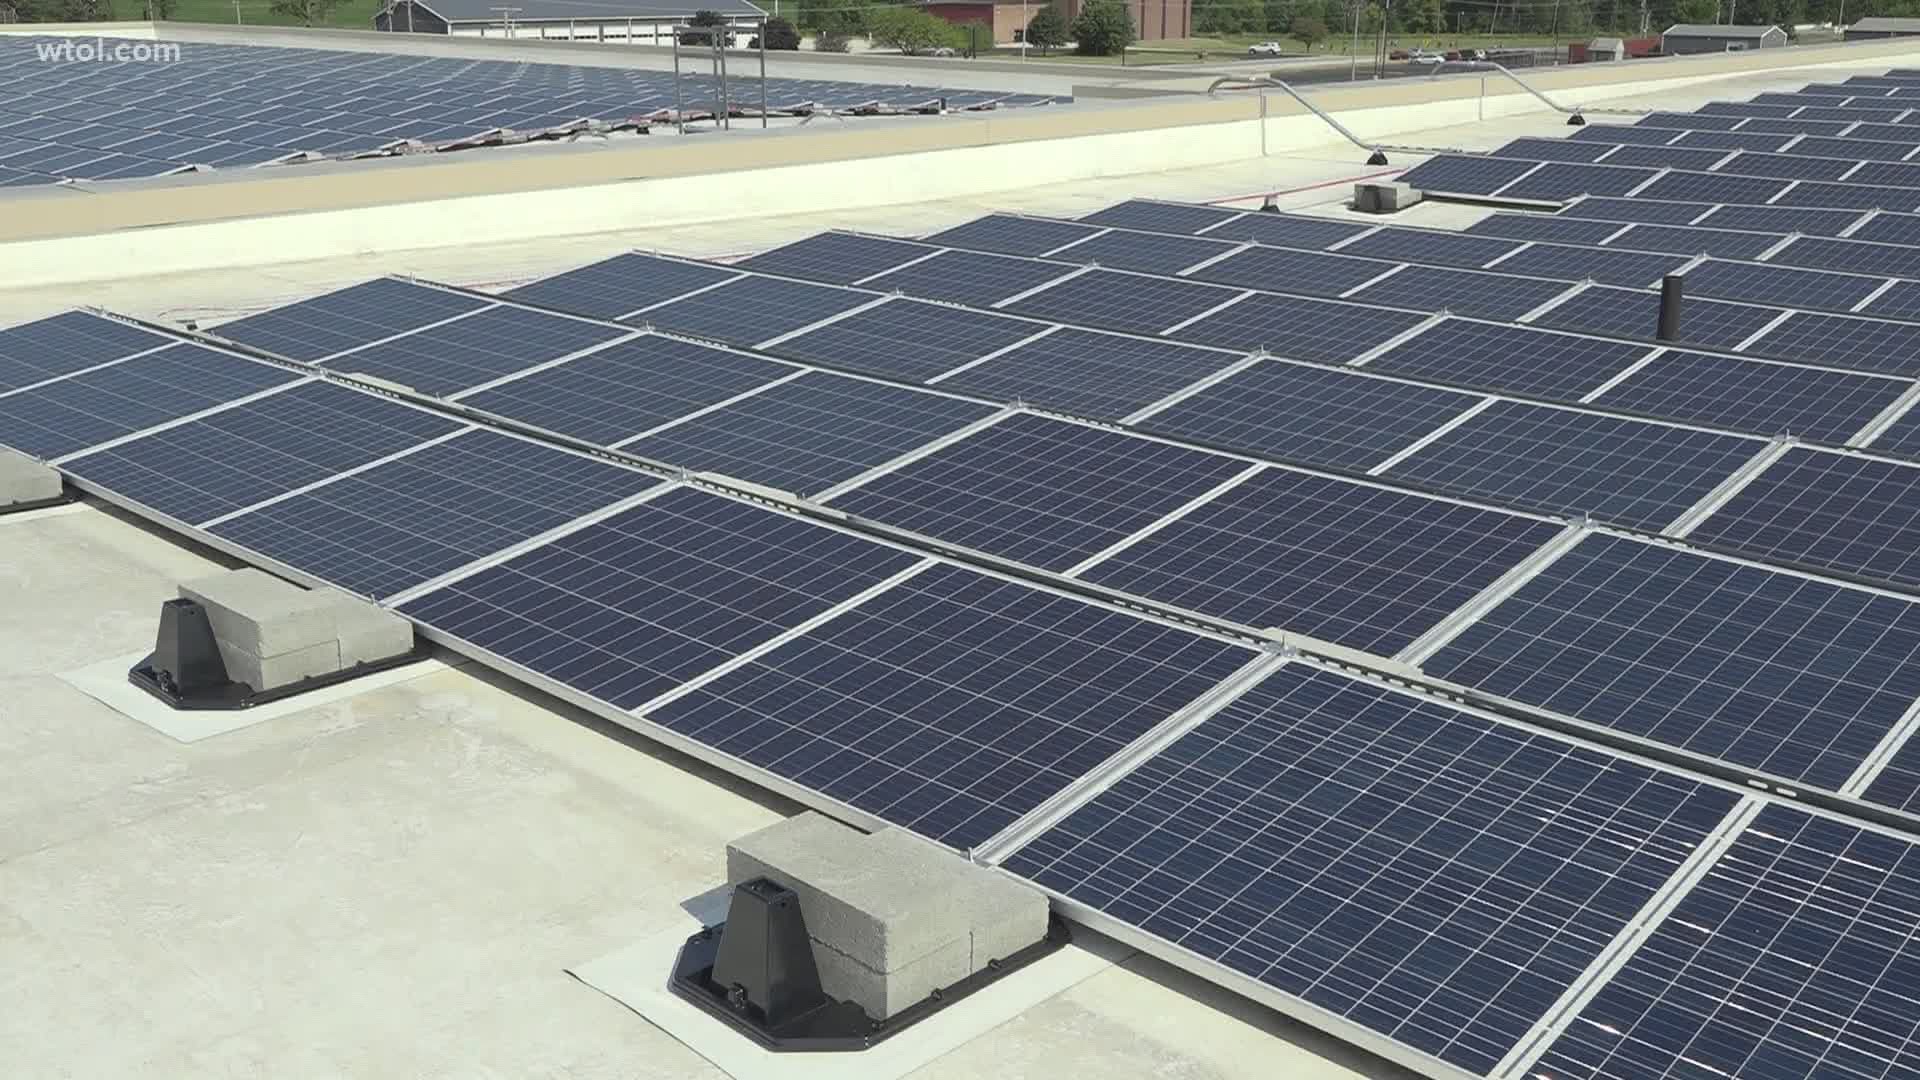 The nearly 1,400 solar panels are expected to generate just less than half of the school districts energy need